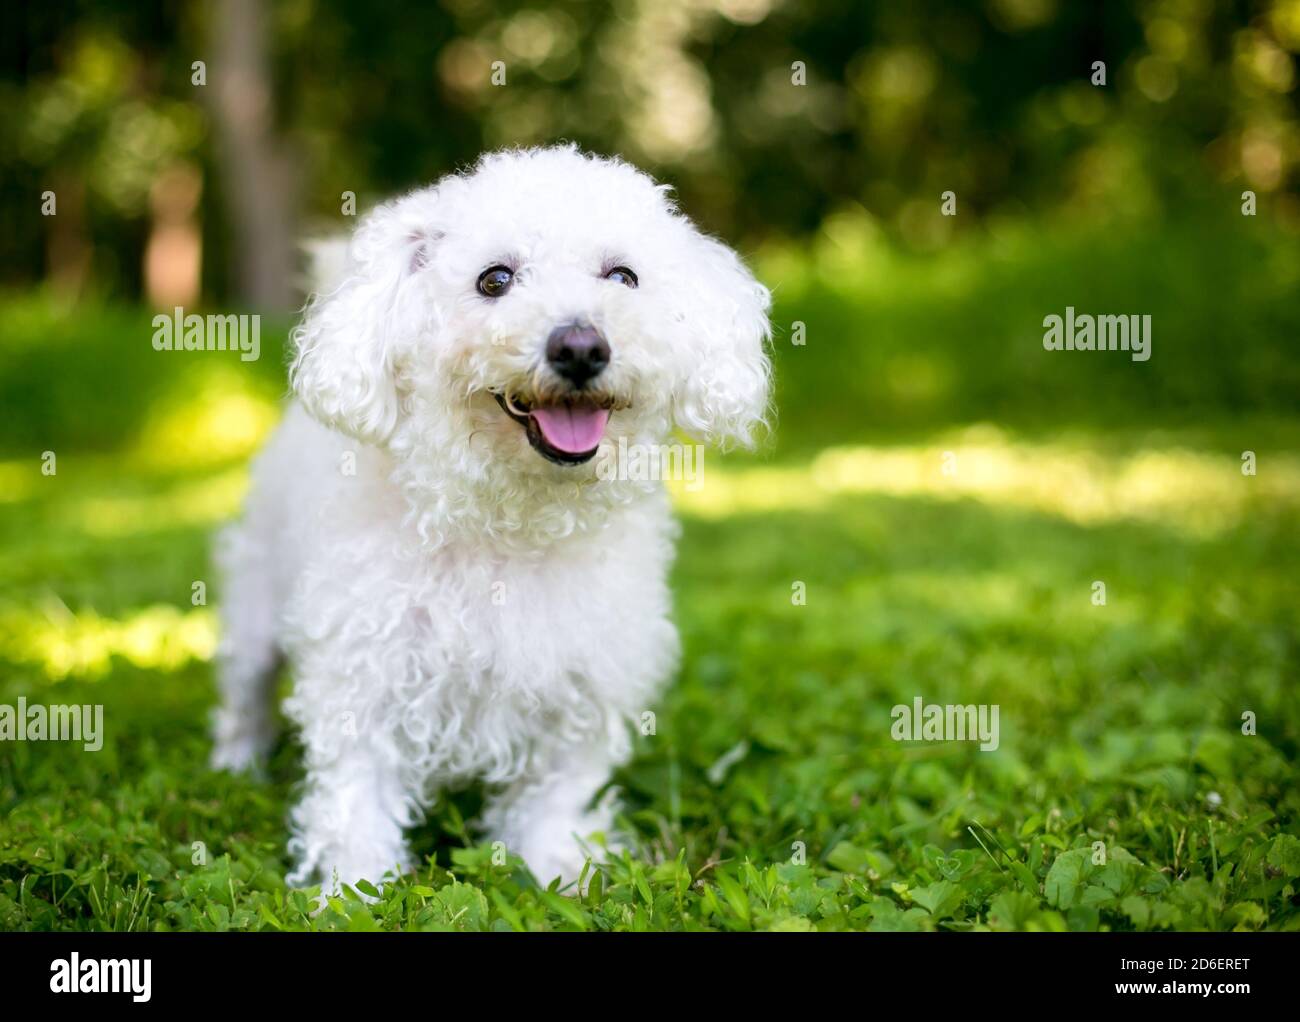 A fuzzy white Bichon Frise dog standing outdoors with a happy expression Stock Photo